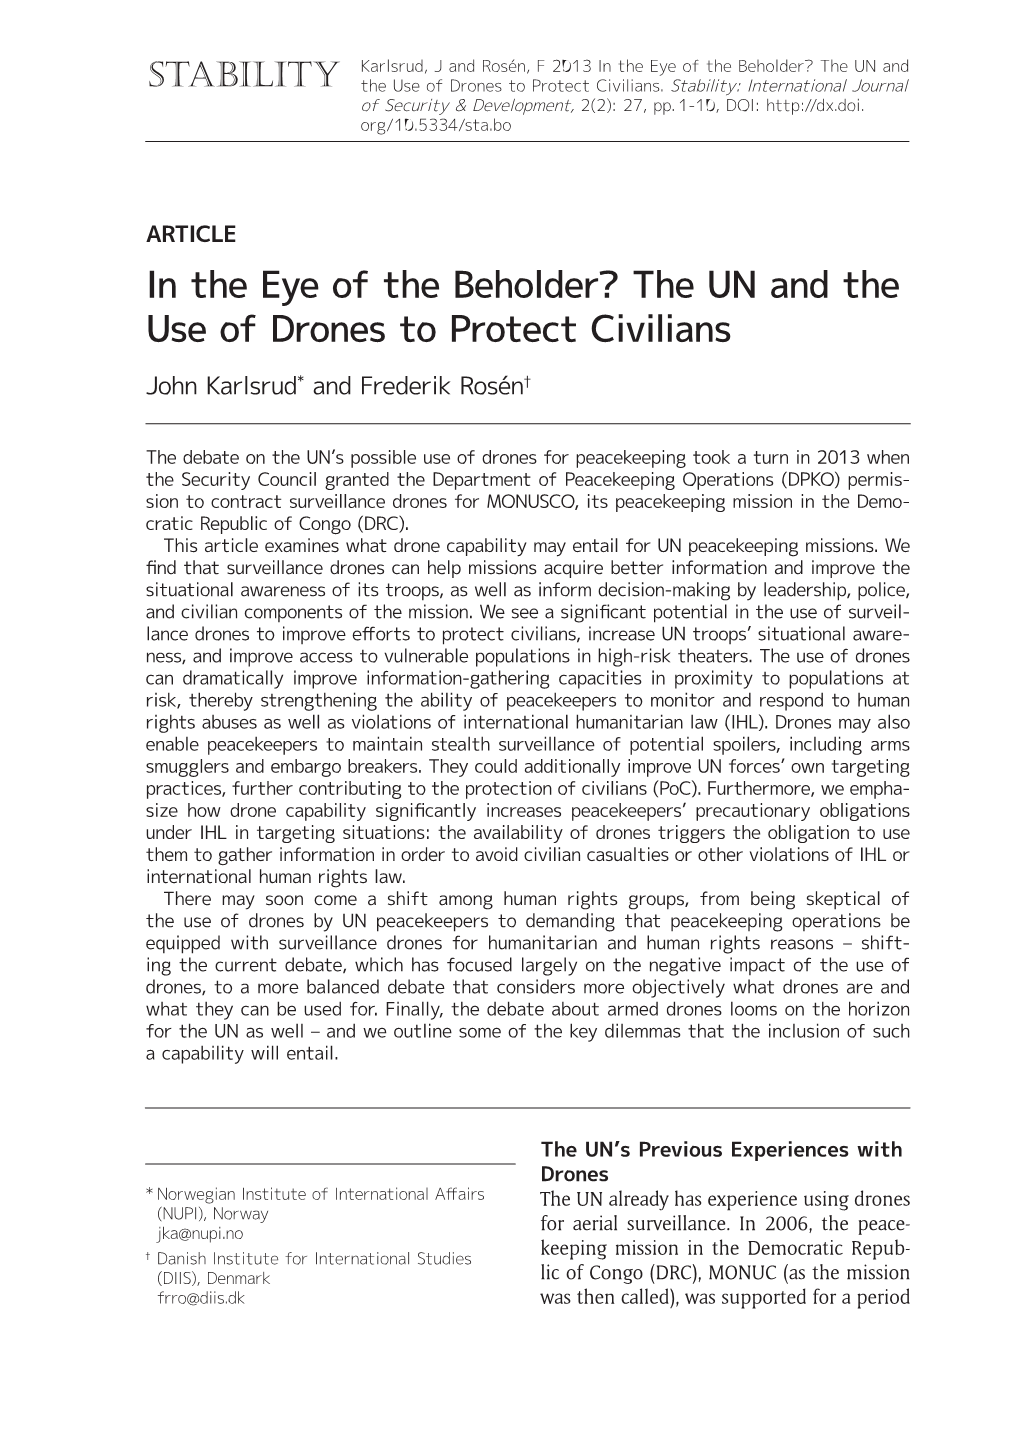 The UN and the Use of Drones to Protect Civilians John Karlsrud* and Frederik Rosén†